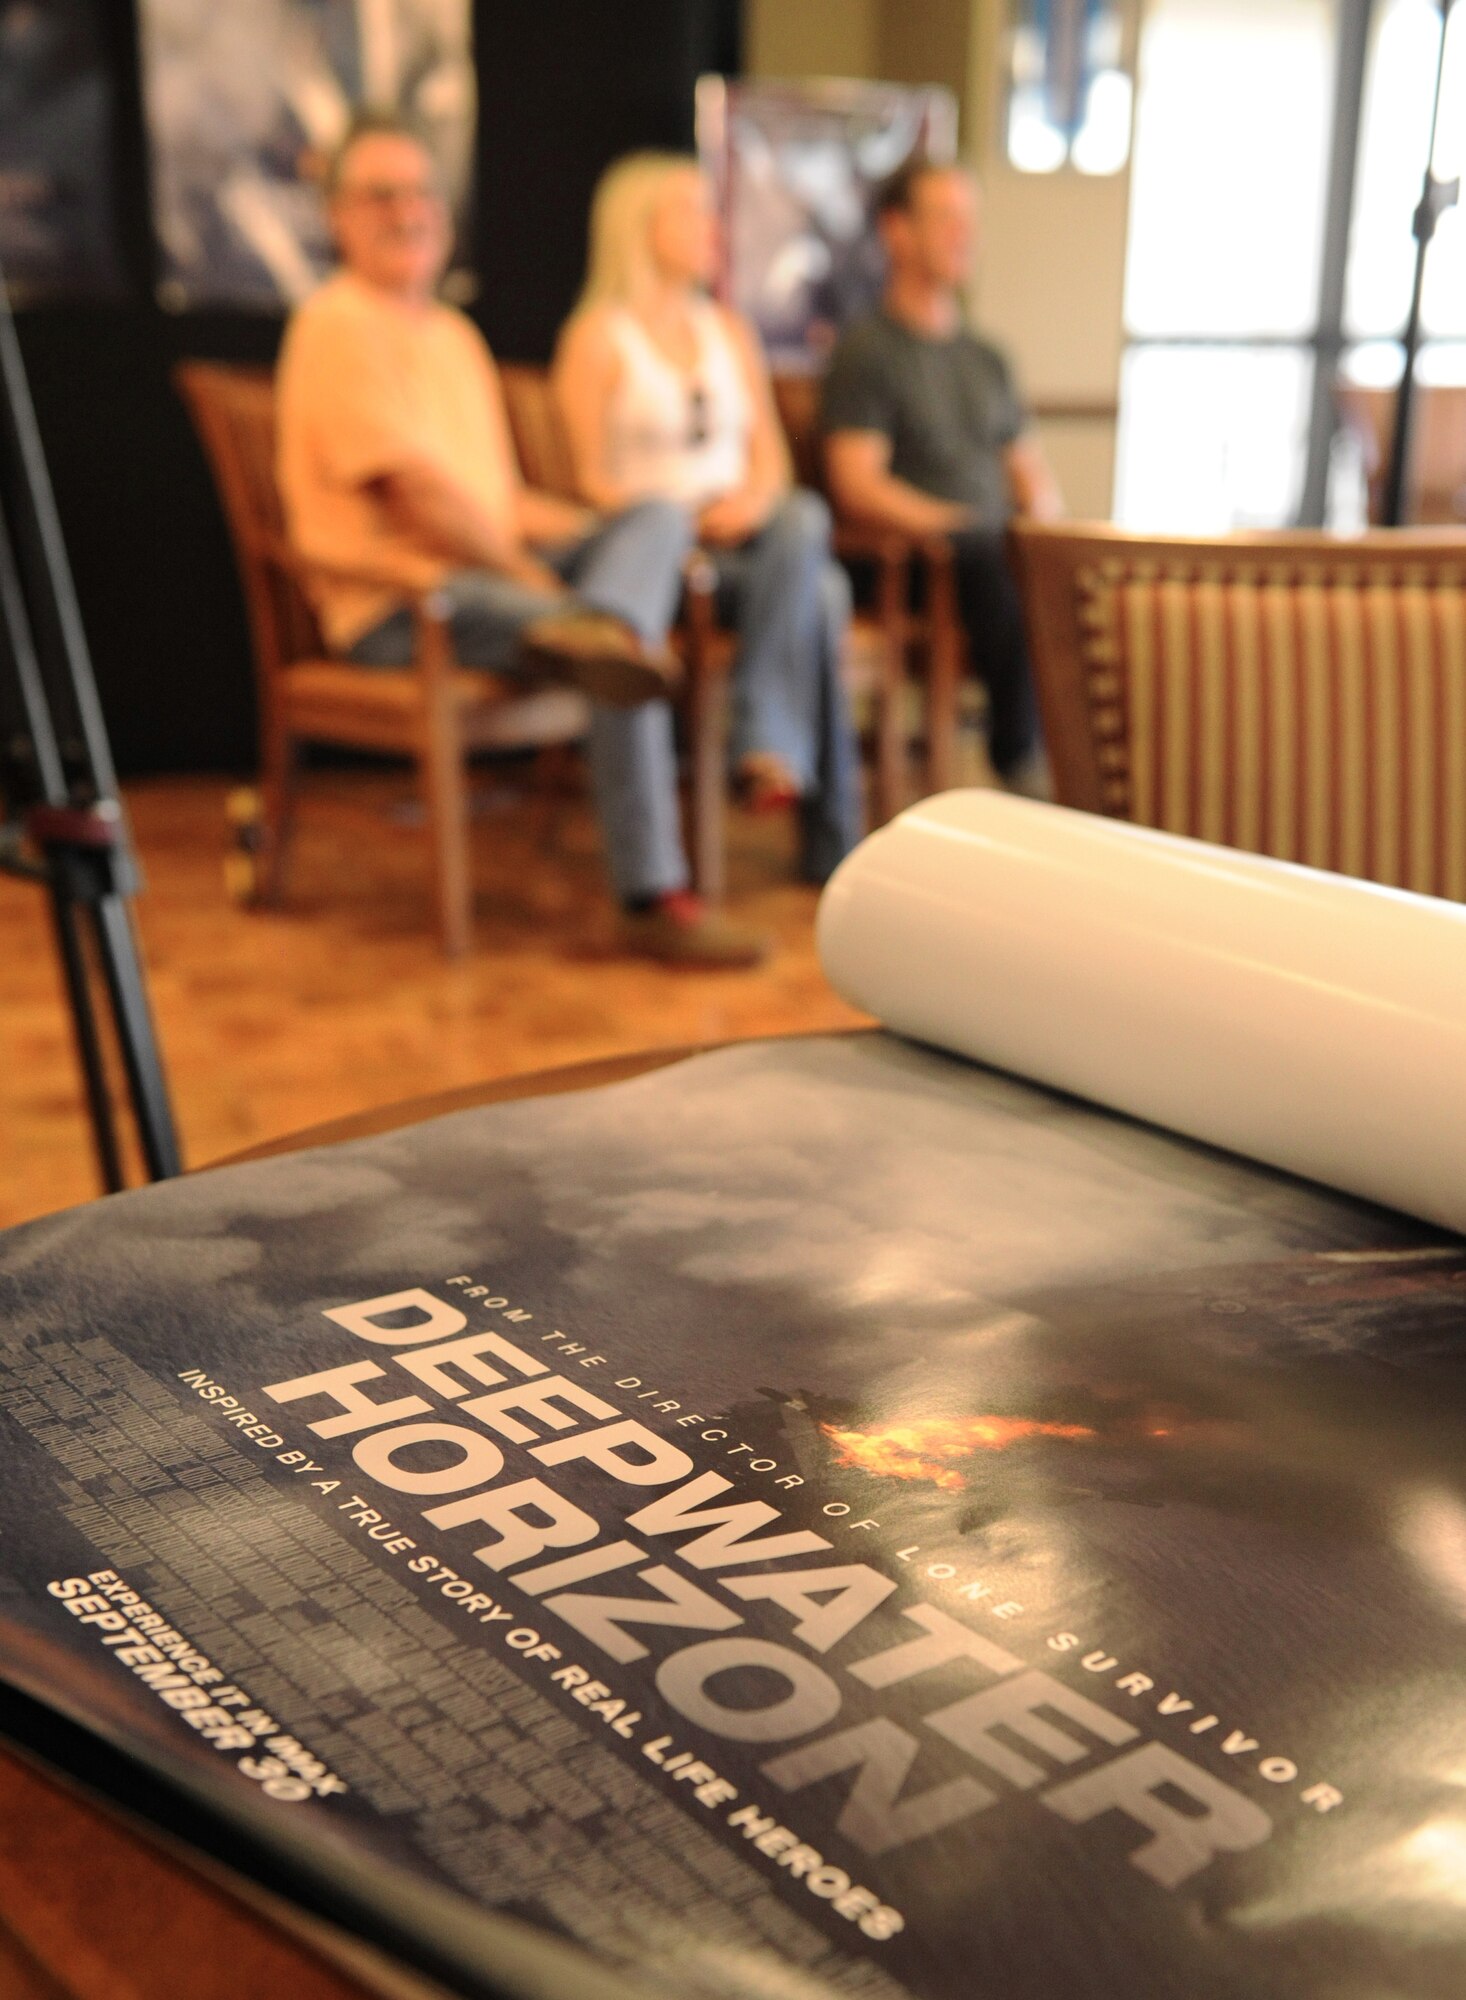 A Deepwater Horizon movie poster sits on a table at the Bay Breeze Event Center before the Deepwater Horizon movie screening Sept. 20, 2016, on Keesler Air Force Base, Miss. Before the screening, Kurt Russell, Kate Hudson, Deepwater Horizon actors, and movie director, Peter Berg, took a short tour of the 81st Training Wing and 403rd Wing to meet with Airmen and learn about their missions at Keesler. (U.S. Air Force photo by Kemberly Groue/Released)